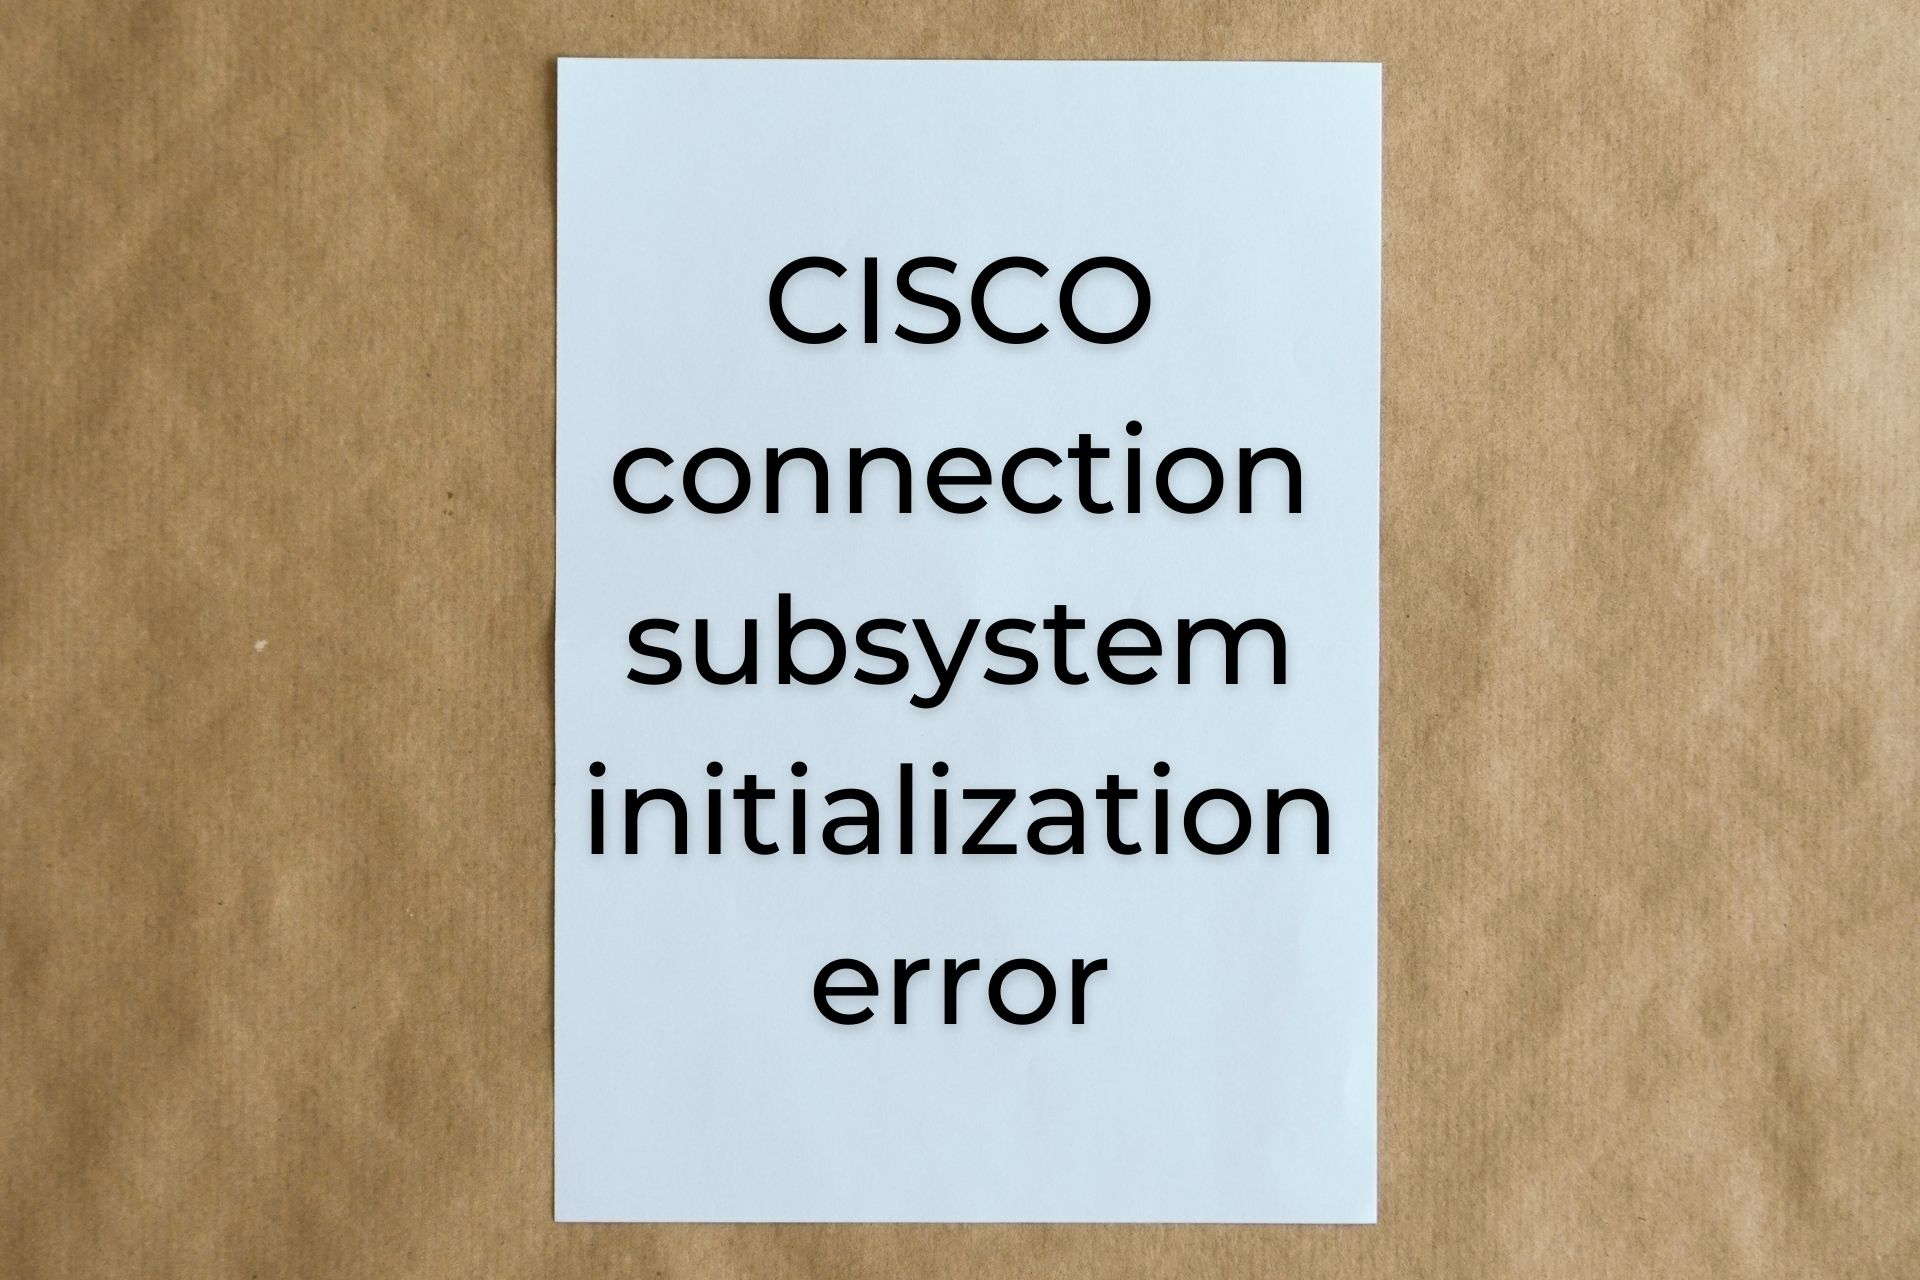 CISCO connection subsystem initialization error